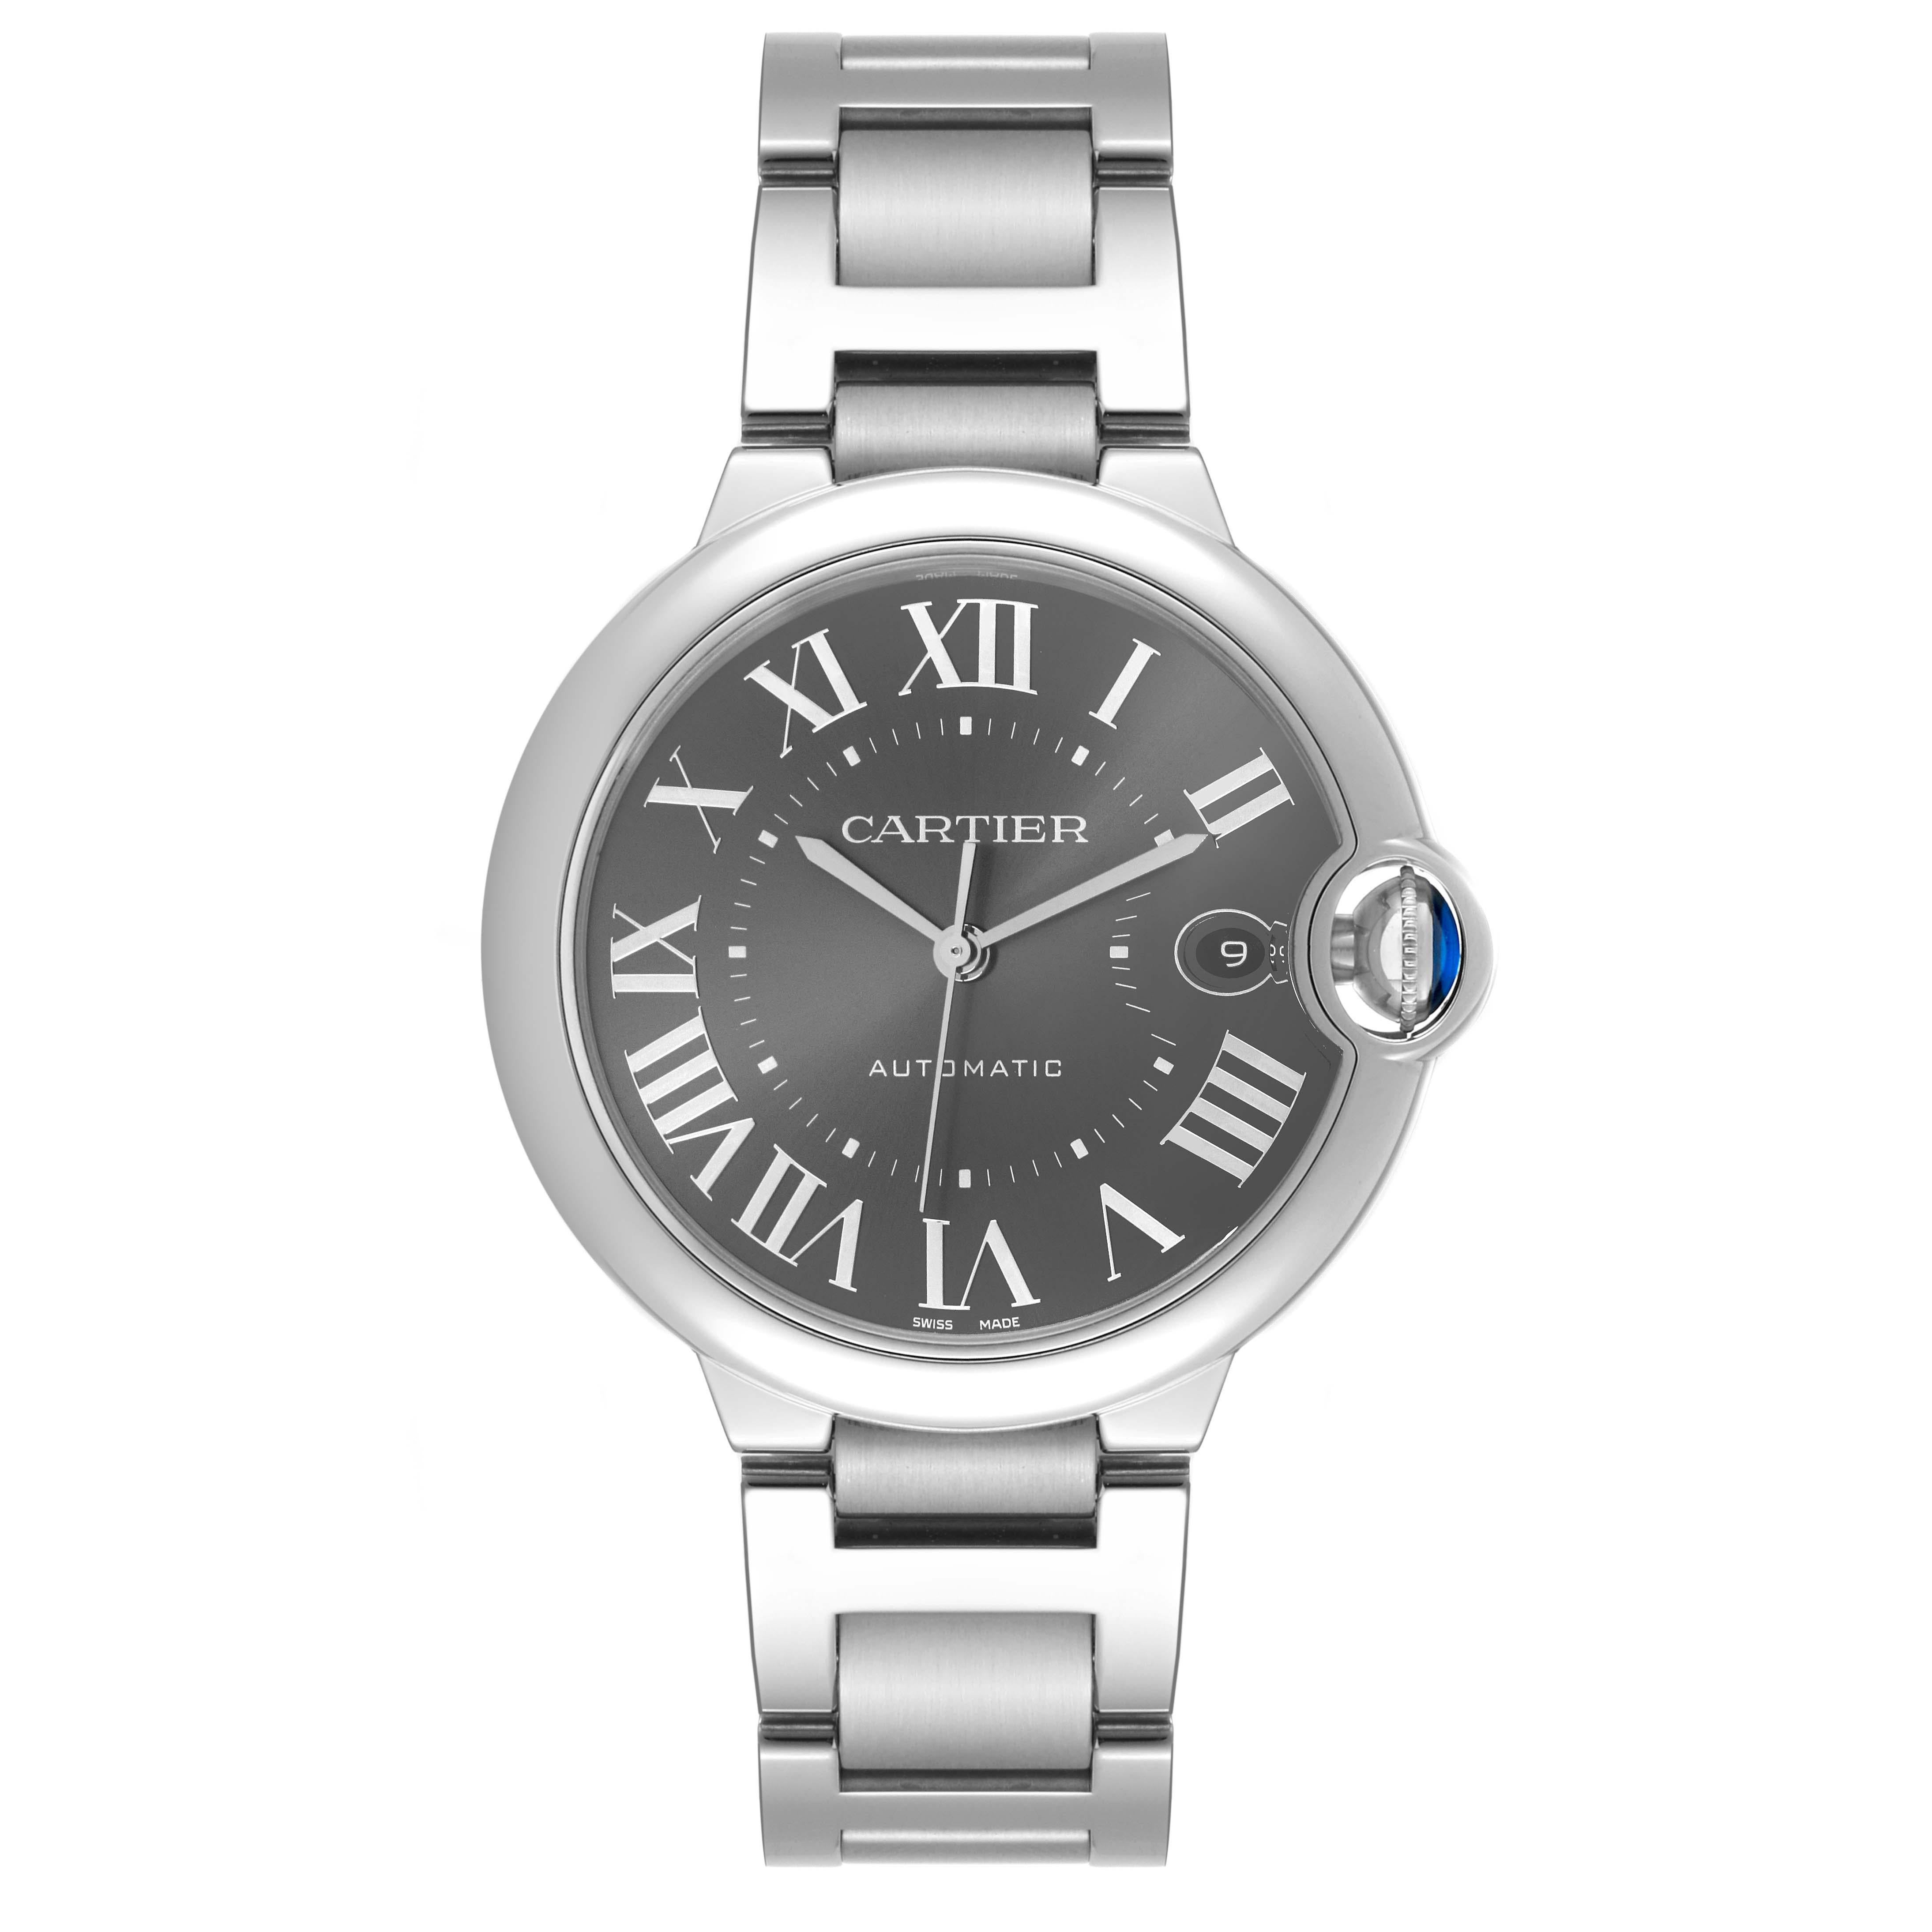 Cartier Ballon Bleu Automatic Grey Dial Steel Mens Watch WSBB0060 Box Card. Automatic self-winding movement. Round stainless steel case 40.0 mm in diameter, 12.4 mm thick. Fluted crown set with the blue spinel cabochon. Stainless steel smooth bezel.